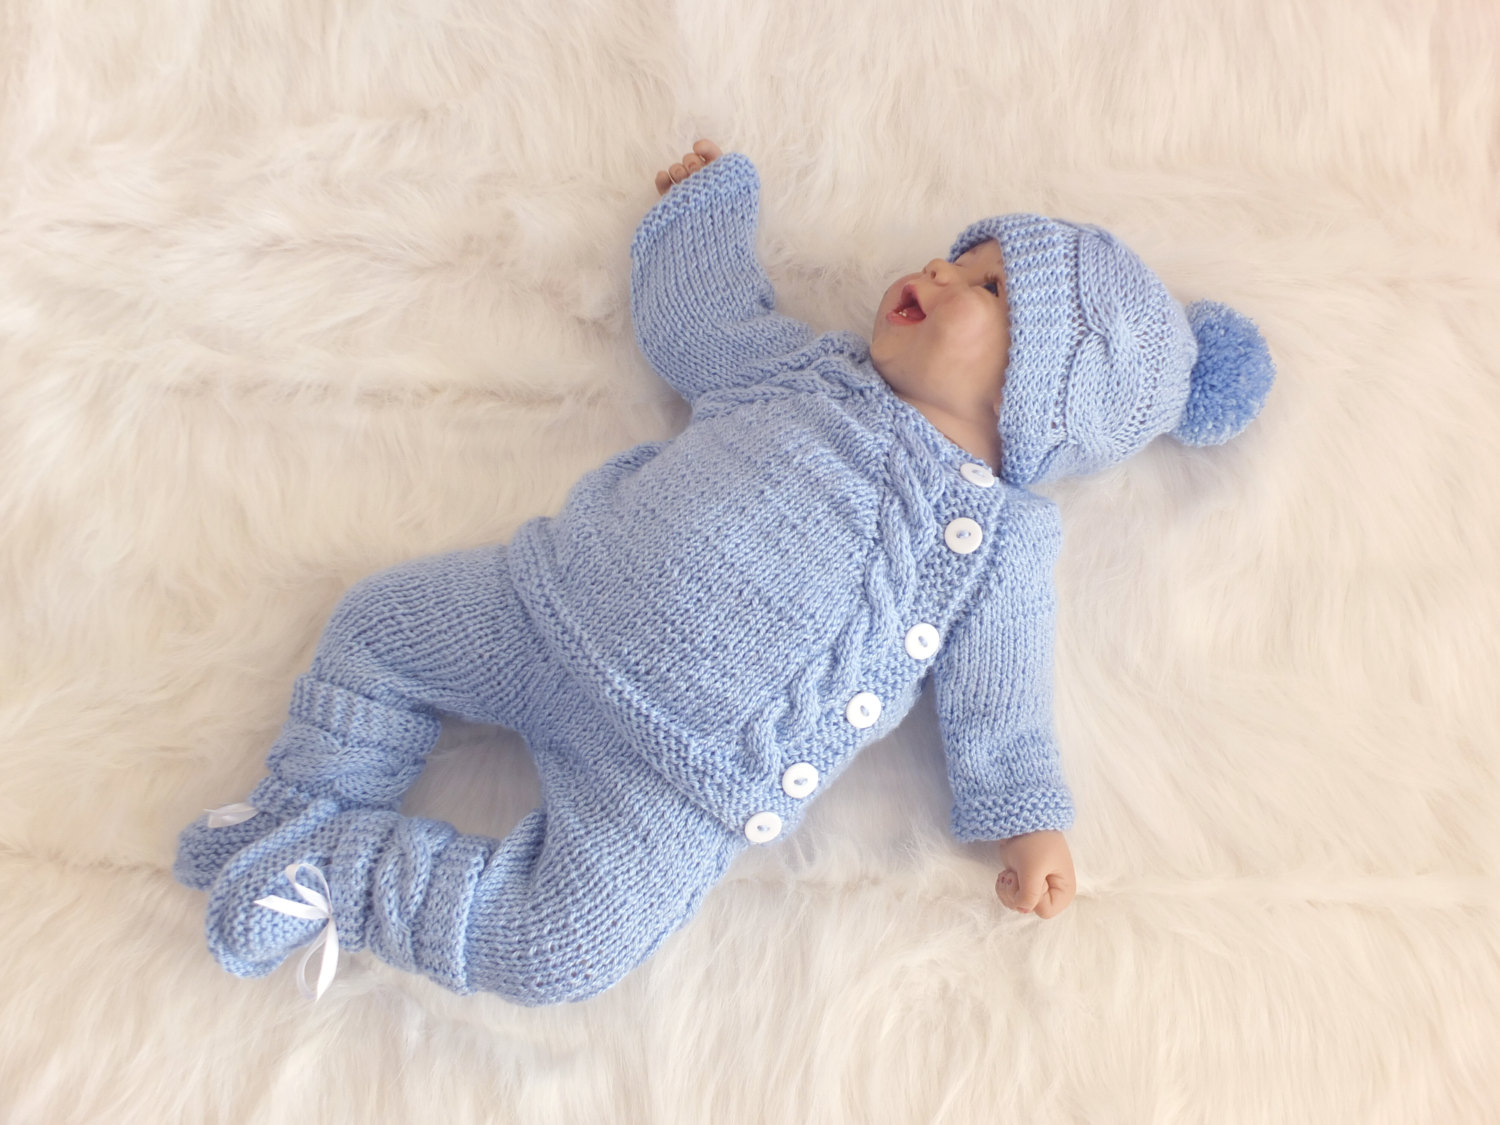 knitted baby clothes handmade by inese NGKGQAR